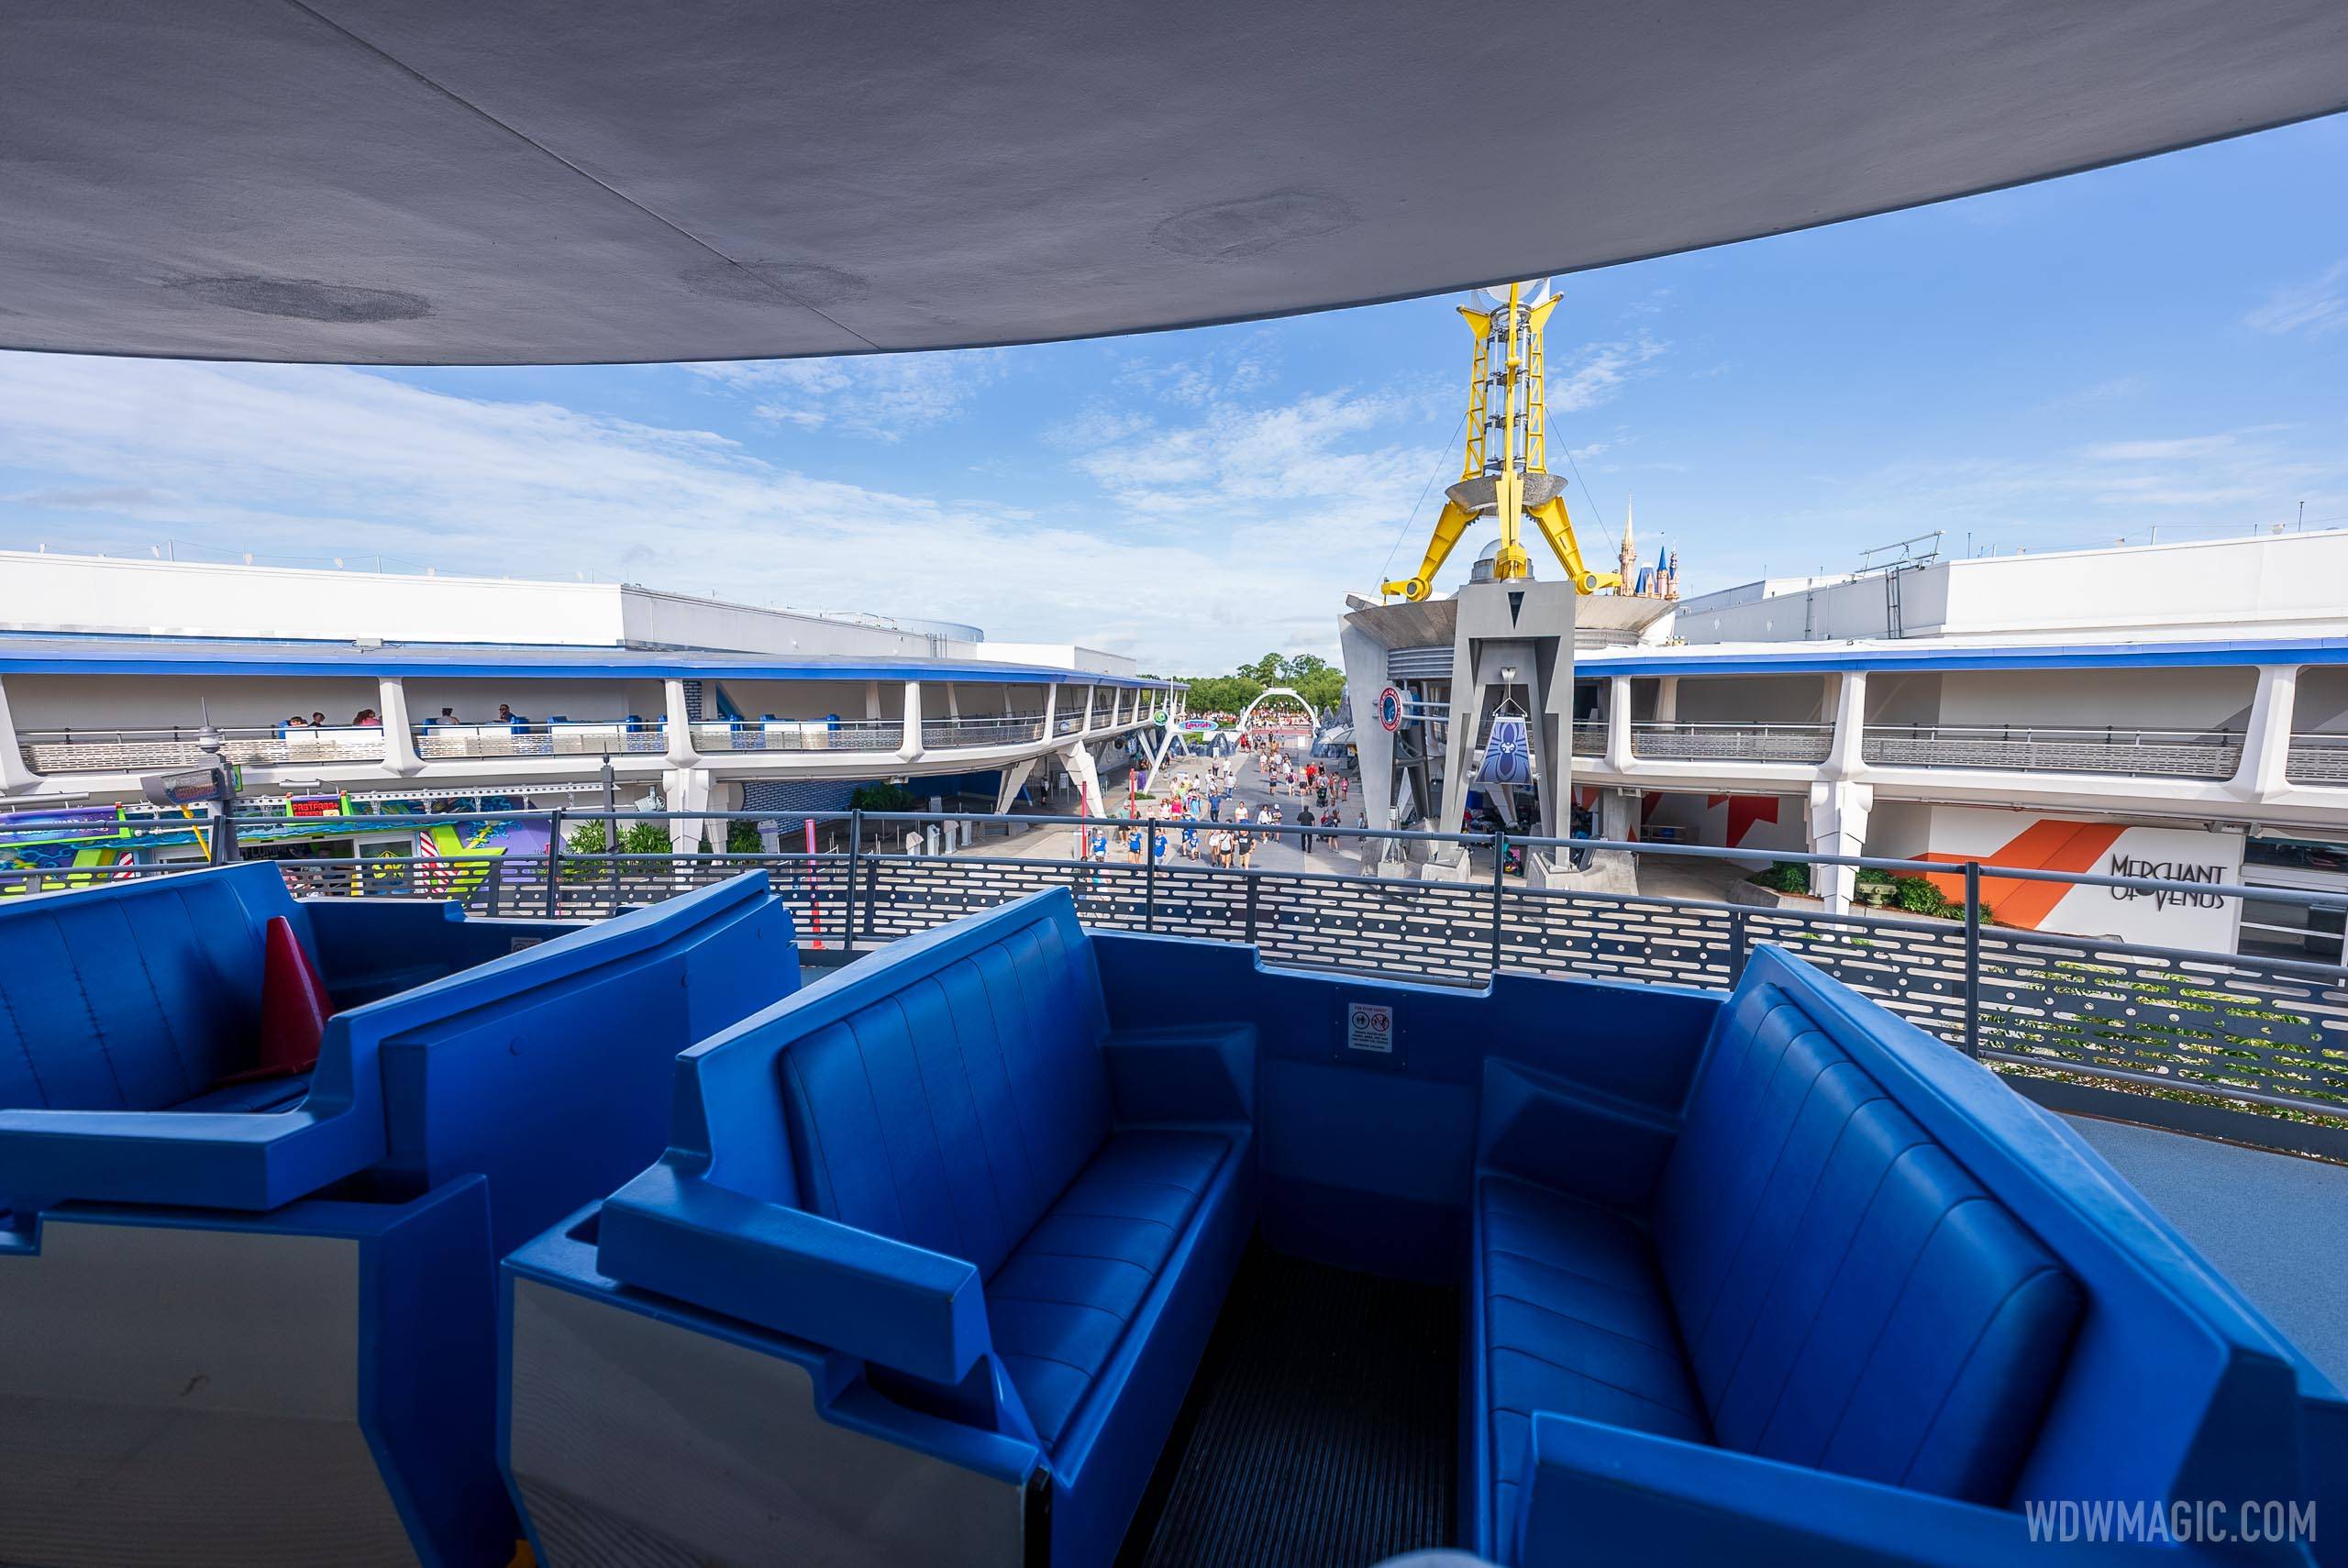 Tomorrowland Transit Authority PeopleMover remains closed since Monday breakdown